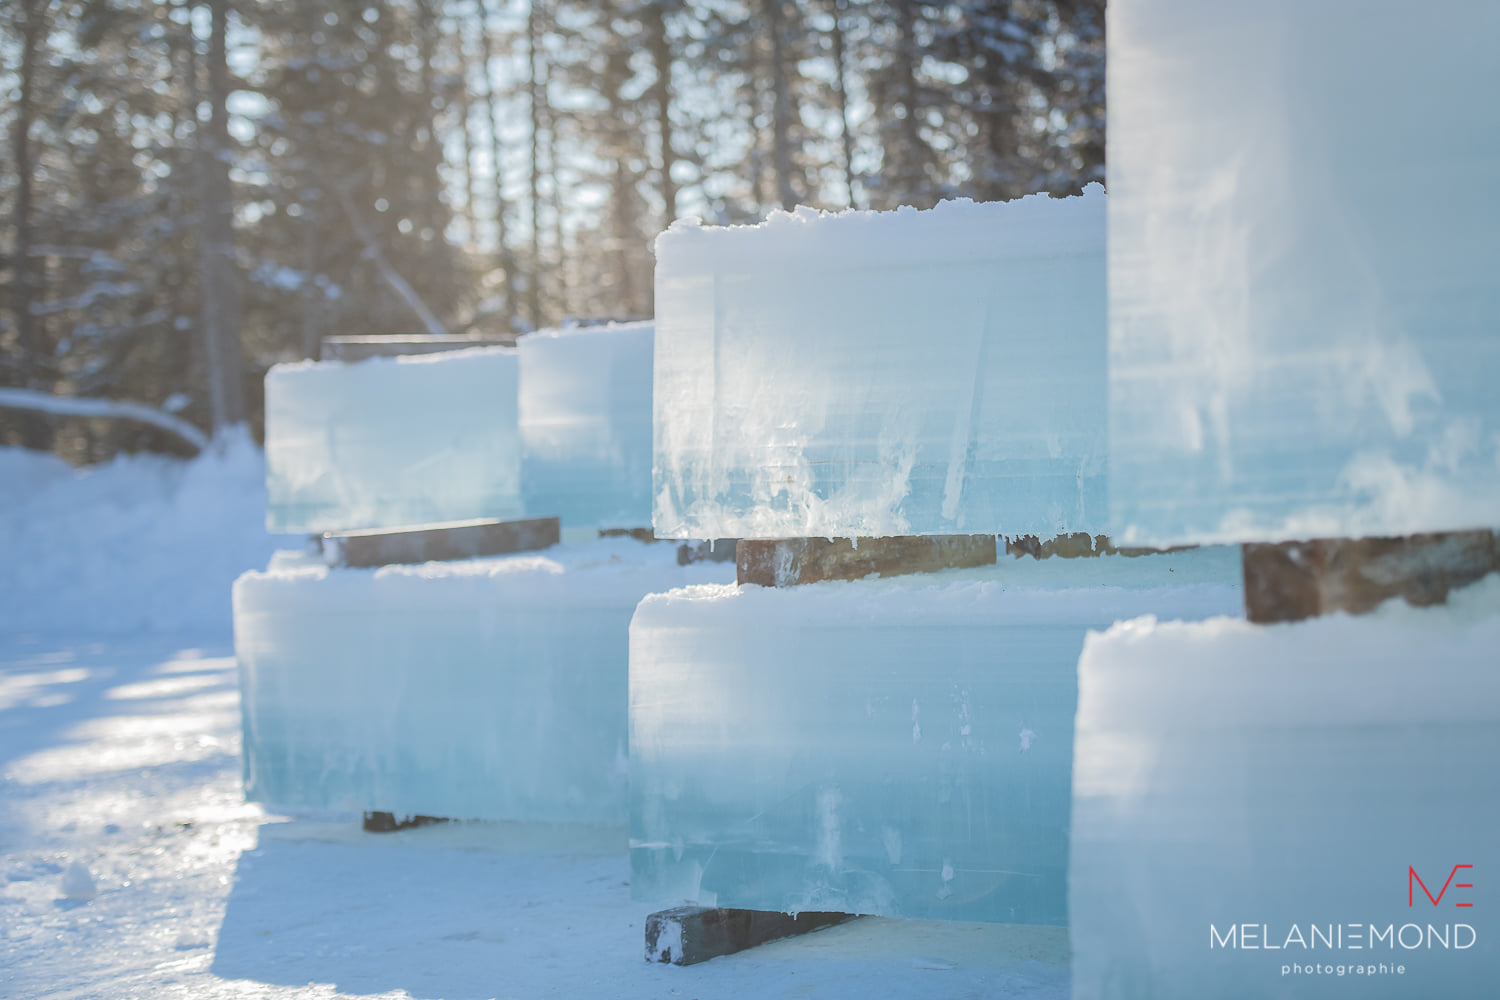 Ice sculpture festival and outdoor fun in Saint-Côme - Bonjour Nature